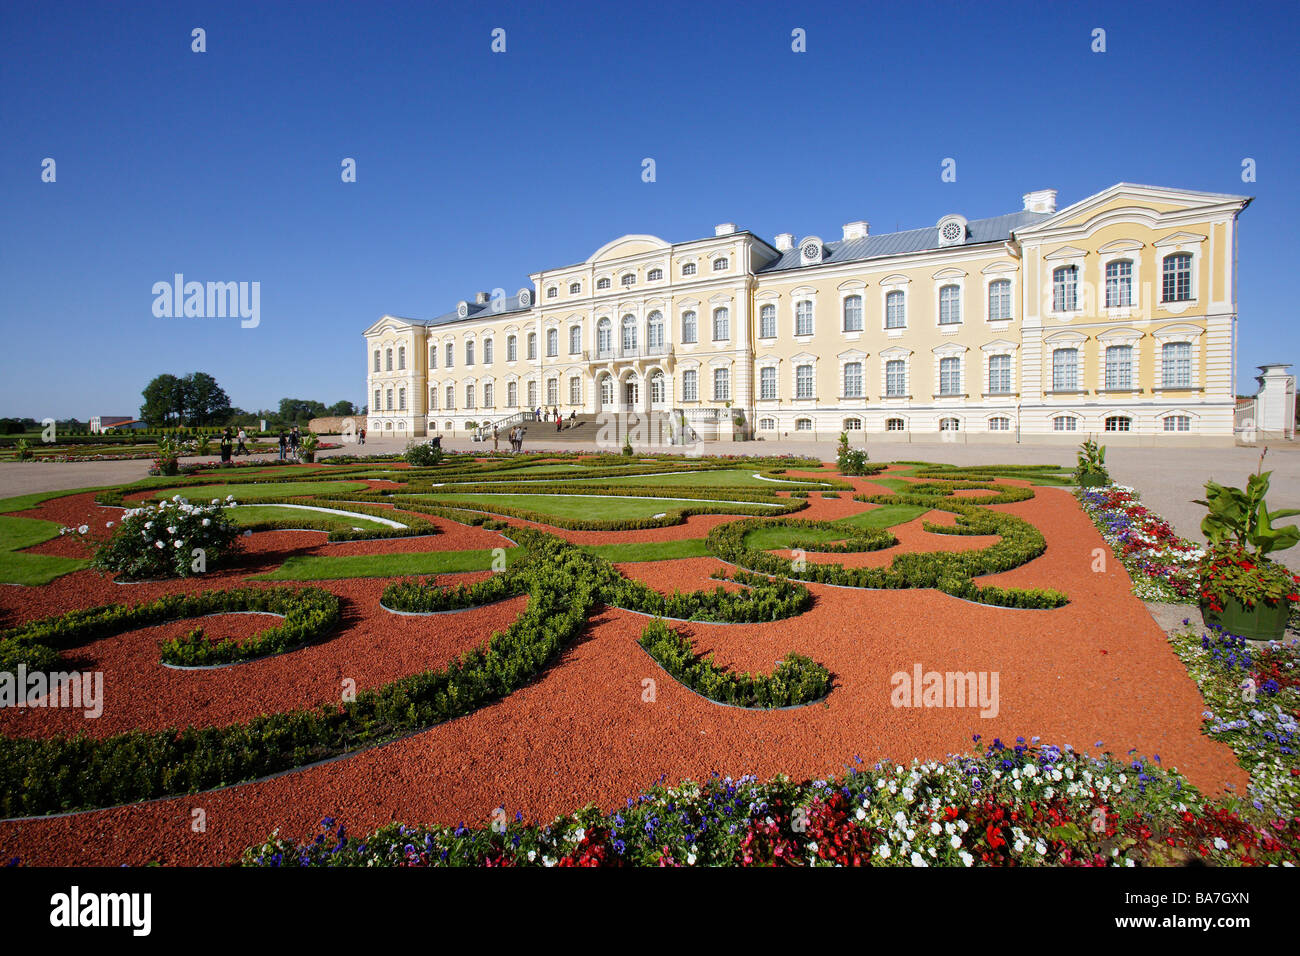 Rundale palace and grounds, built by Italian architect Bartolomeo Francesco Rastrelli 1735 to 1769 for the Duchy of Courland, La Stock Photo